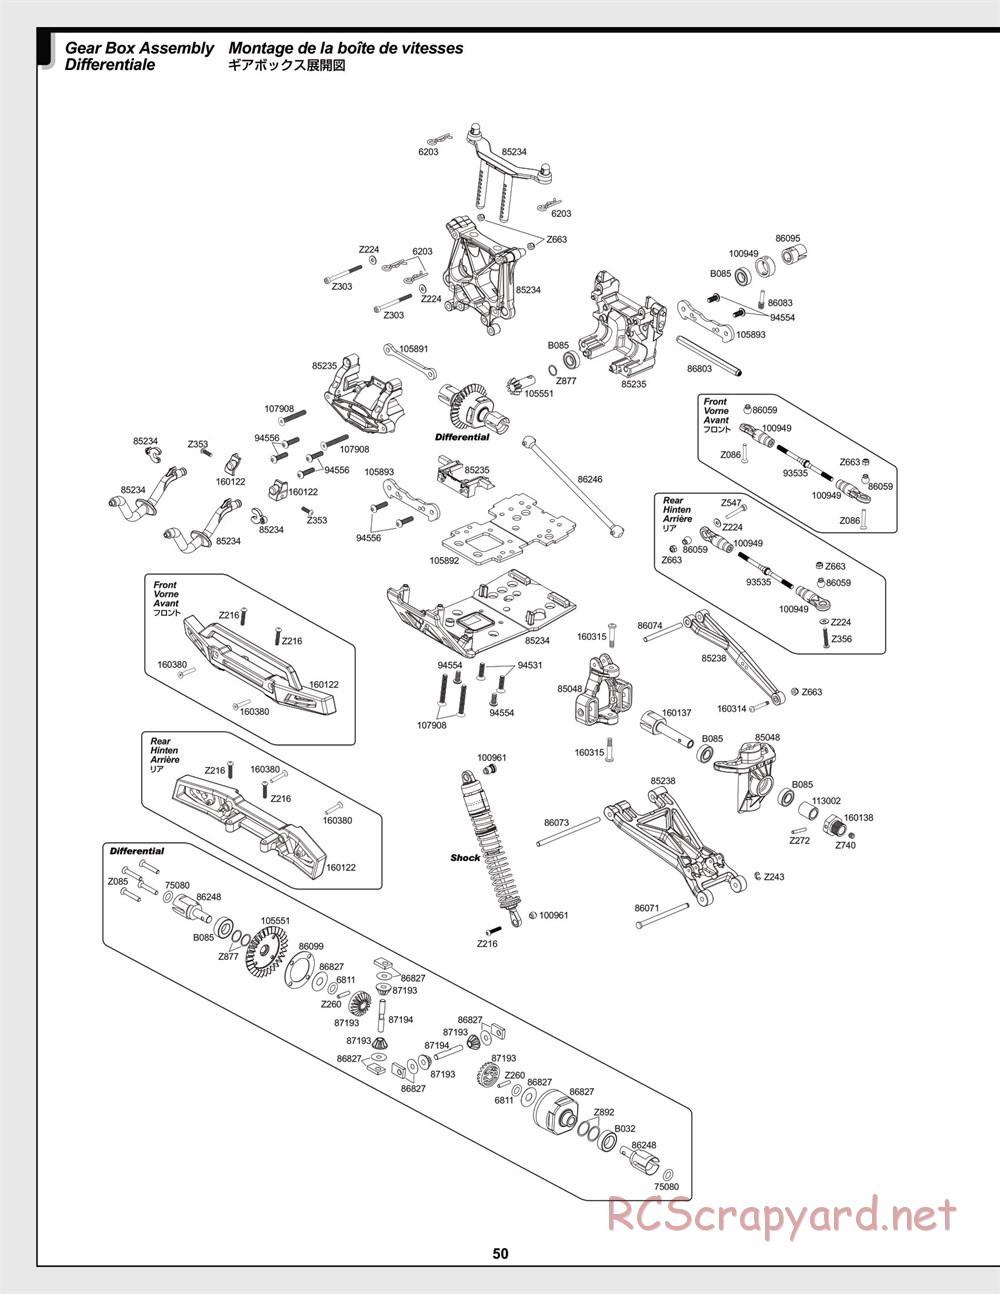 HPI - Savage XL 5.9 - Exploded View - Page 50